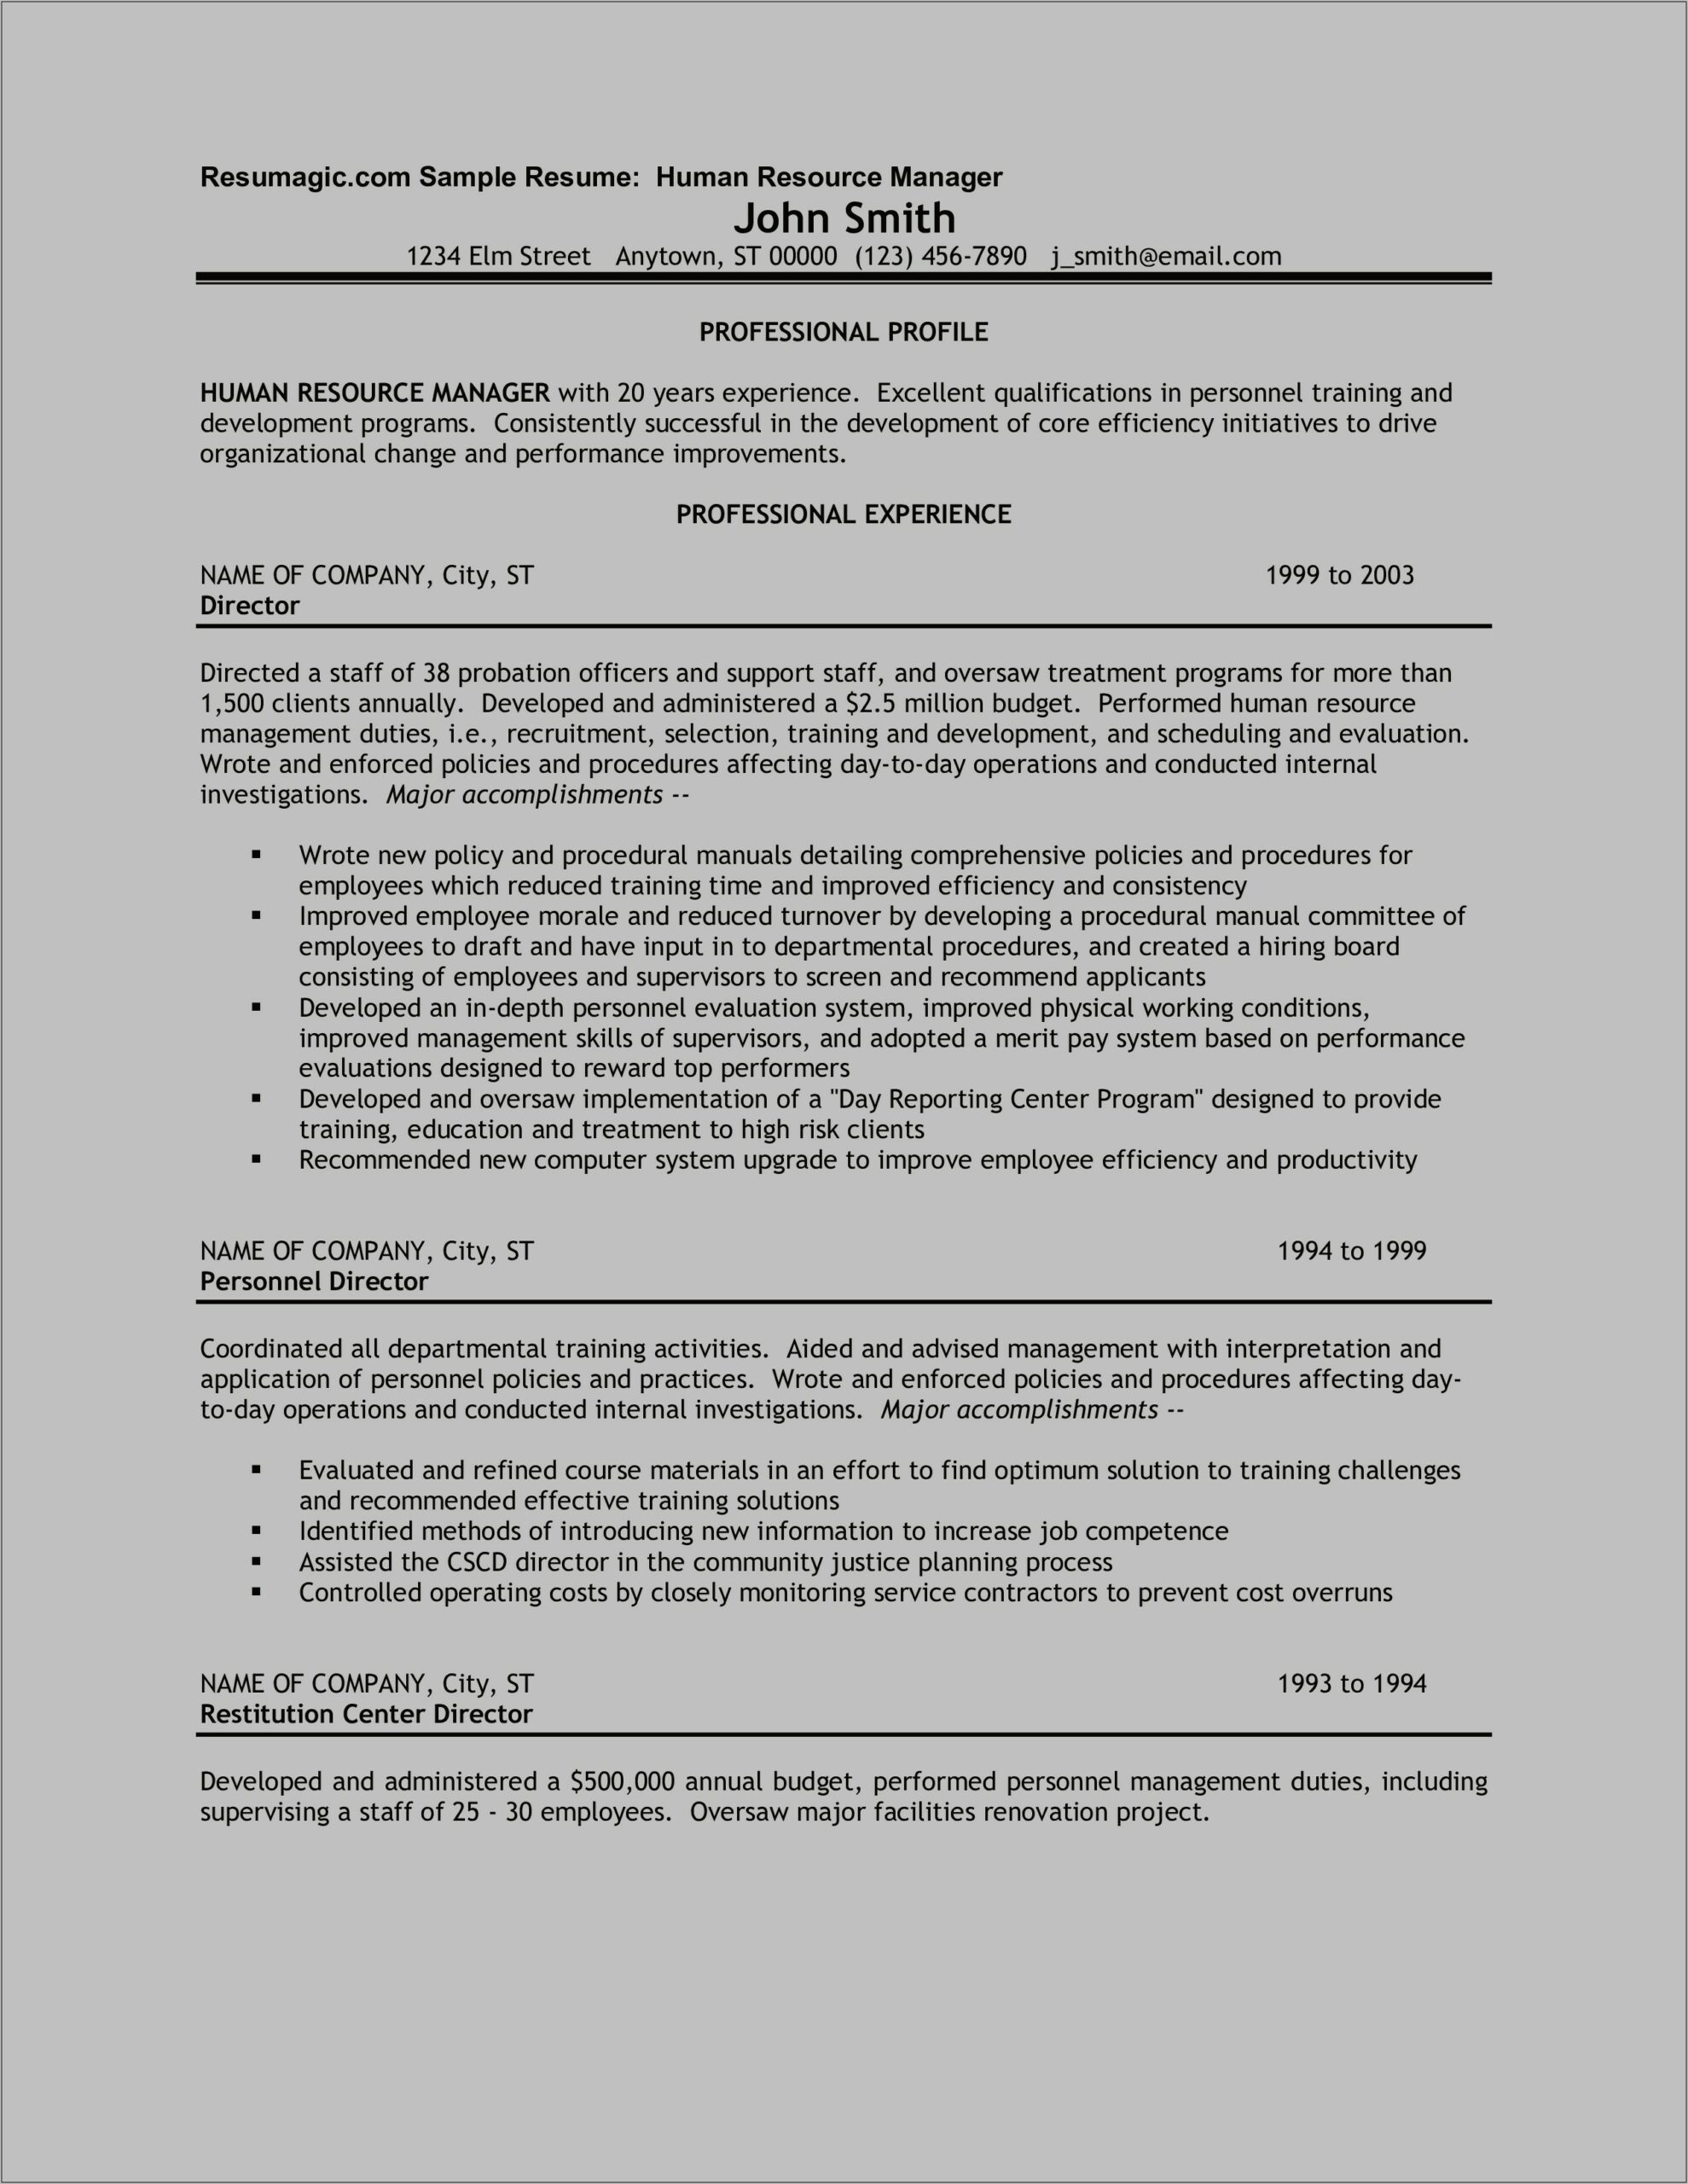 Example Of Human Resource Manager Resume